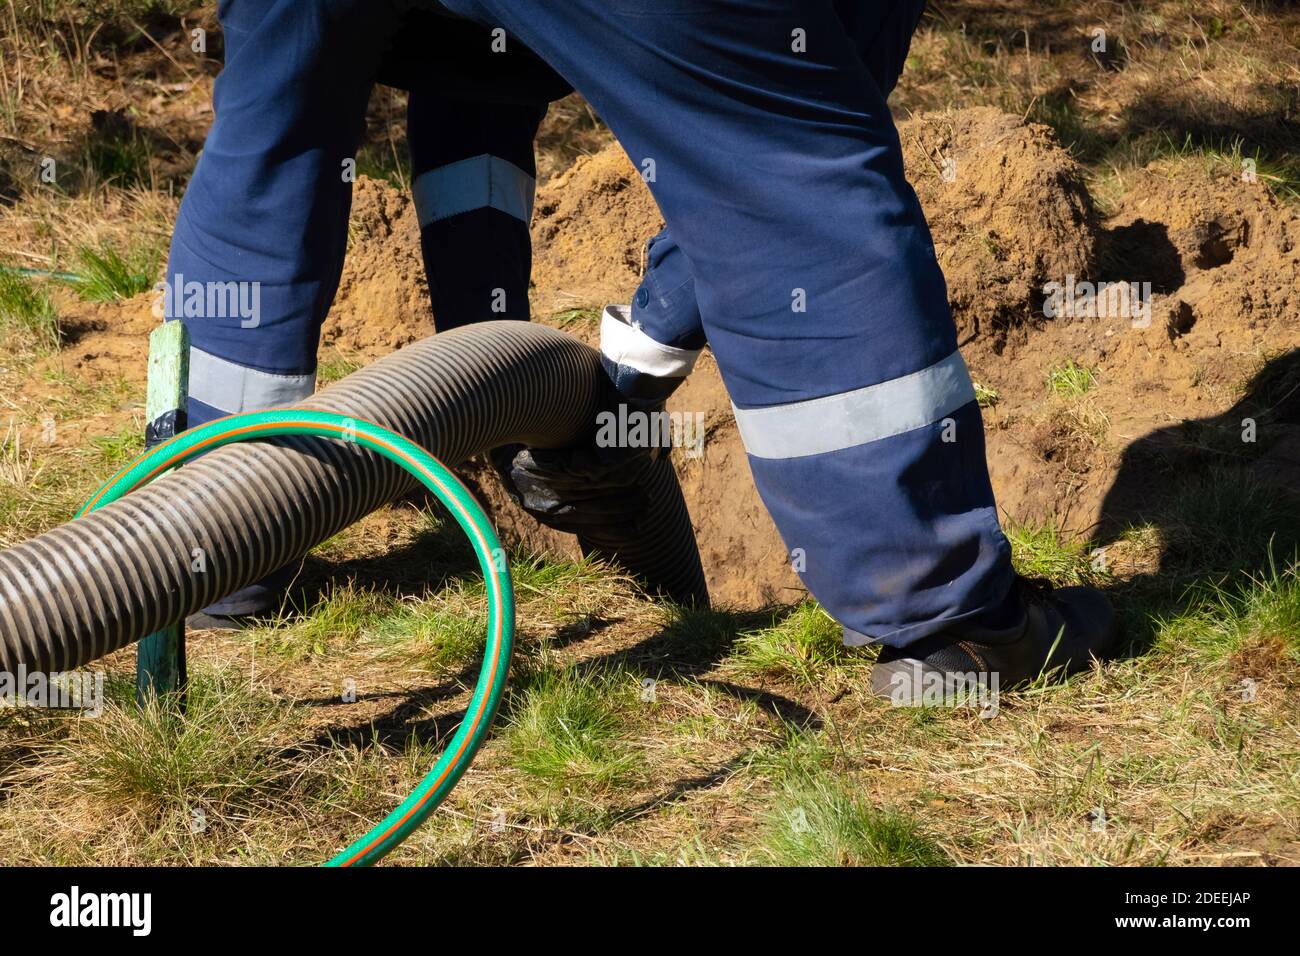 https://c8.alamy.com/comp/2DEEJAP/man-worker-holding-pipe-providing-sewer-cleaning-service-outdoor-sewage-pumping-machine-is-unclogging-blocked-manhole-2DEEJAP.jpg